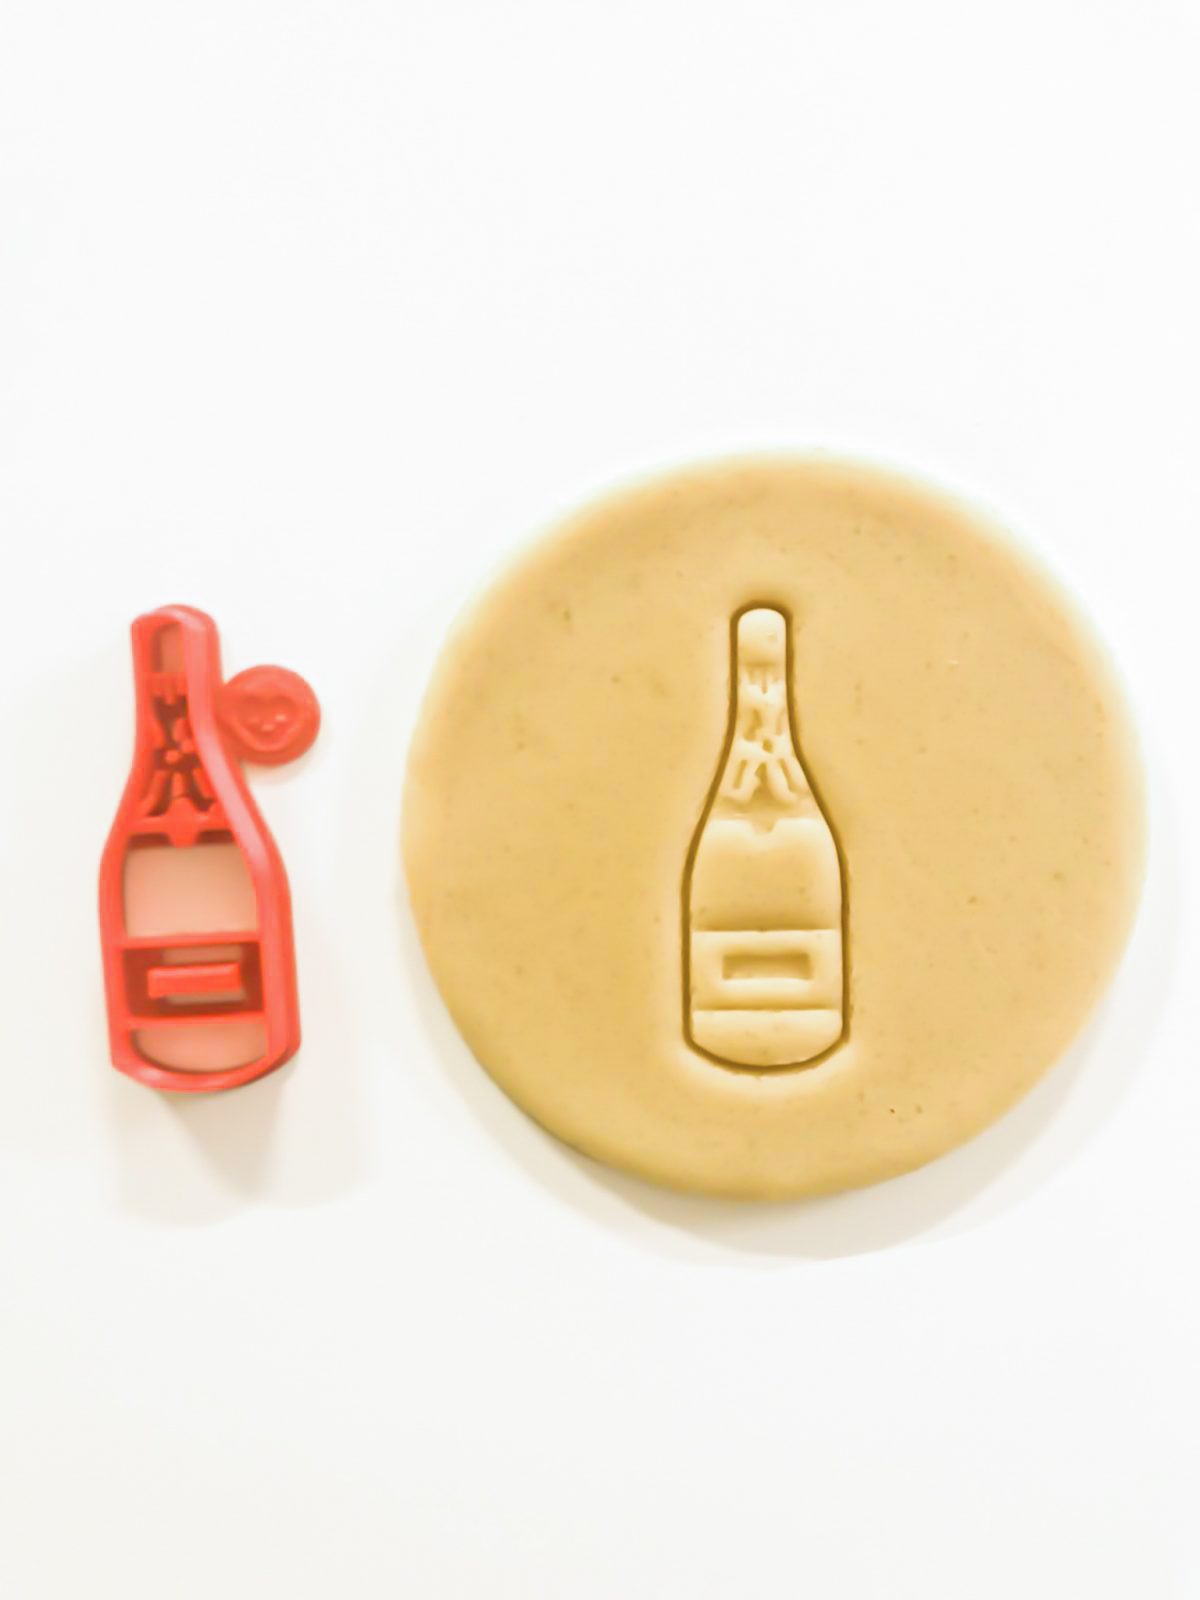 Champagne-Bottle-Cookie-Cutter